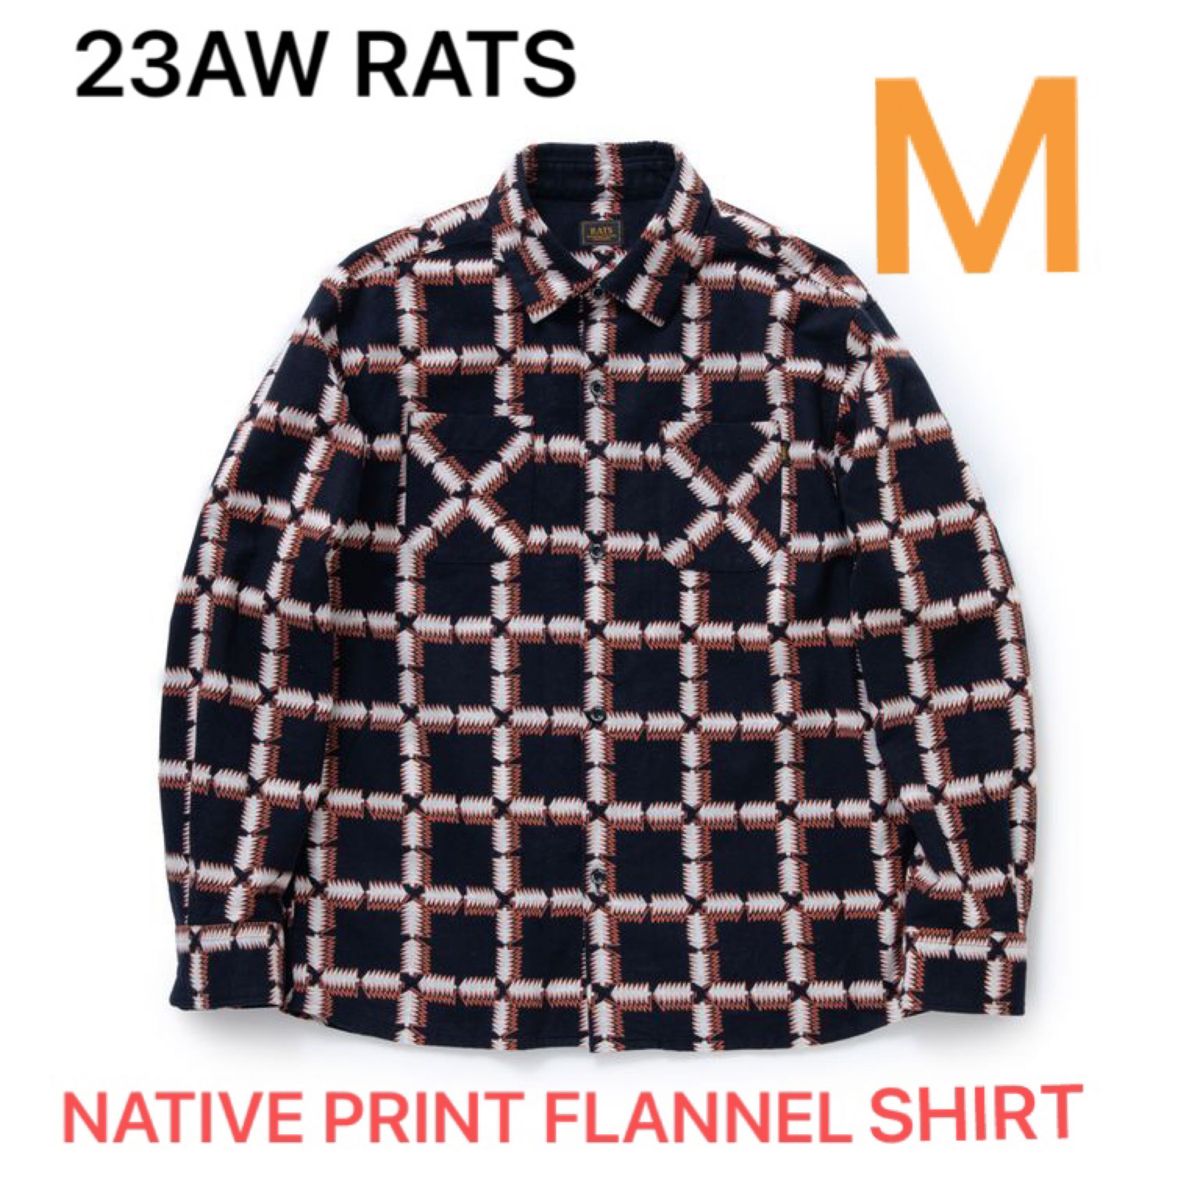 23AW RATS NATIVE PRINT FLANNEL SHIRT 